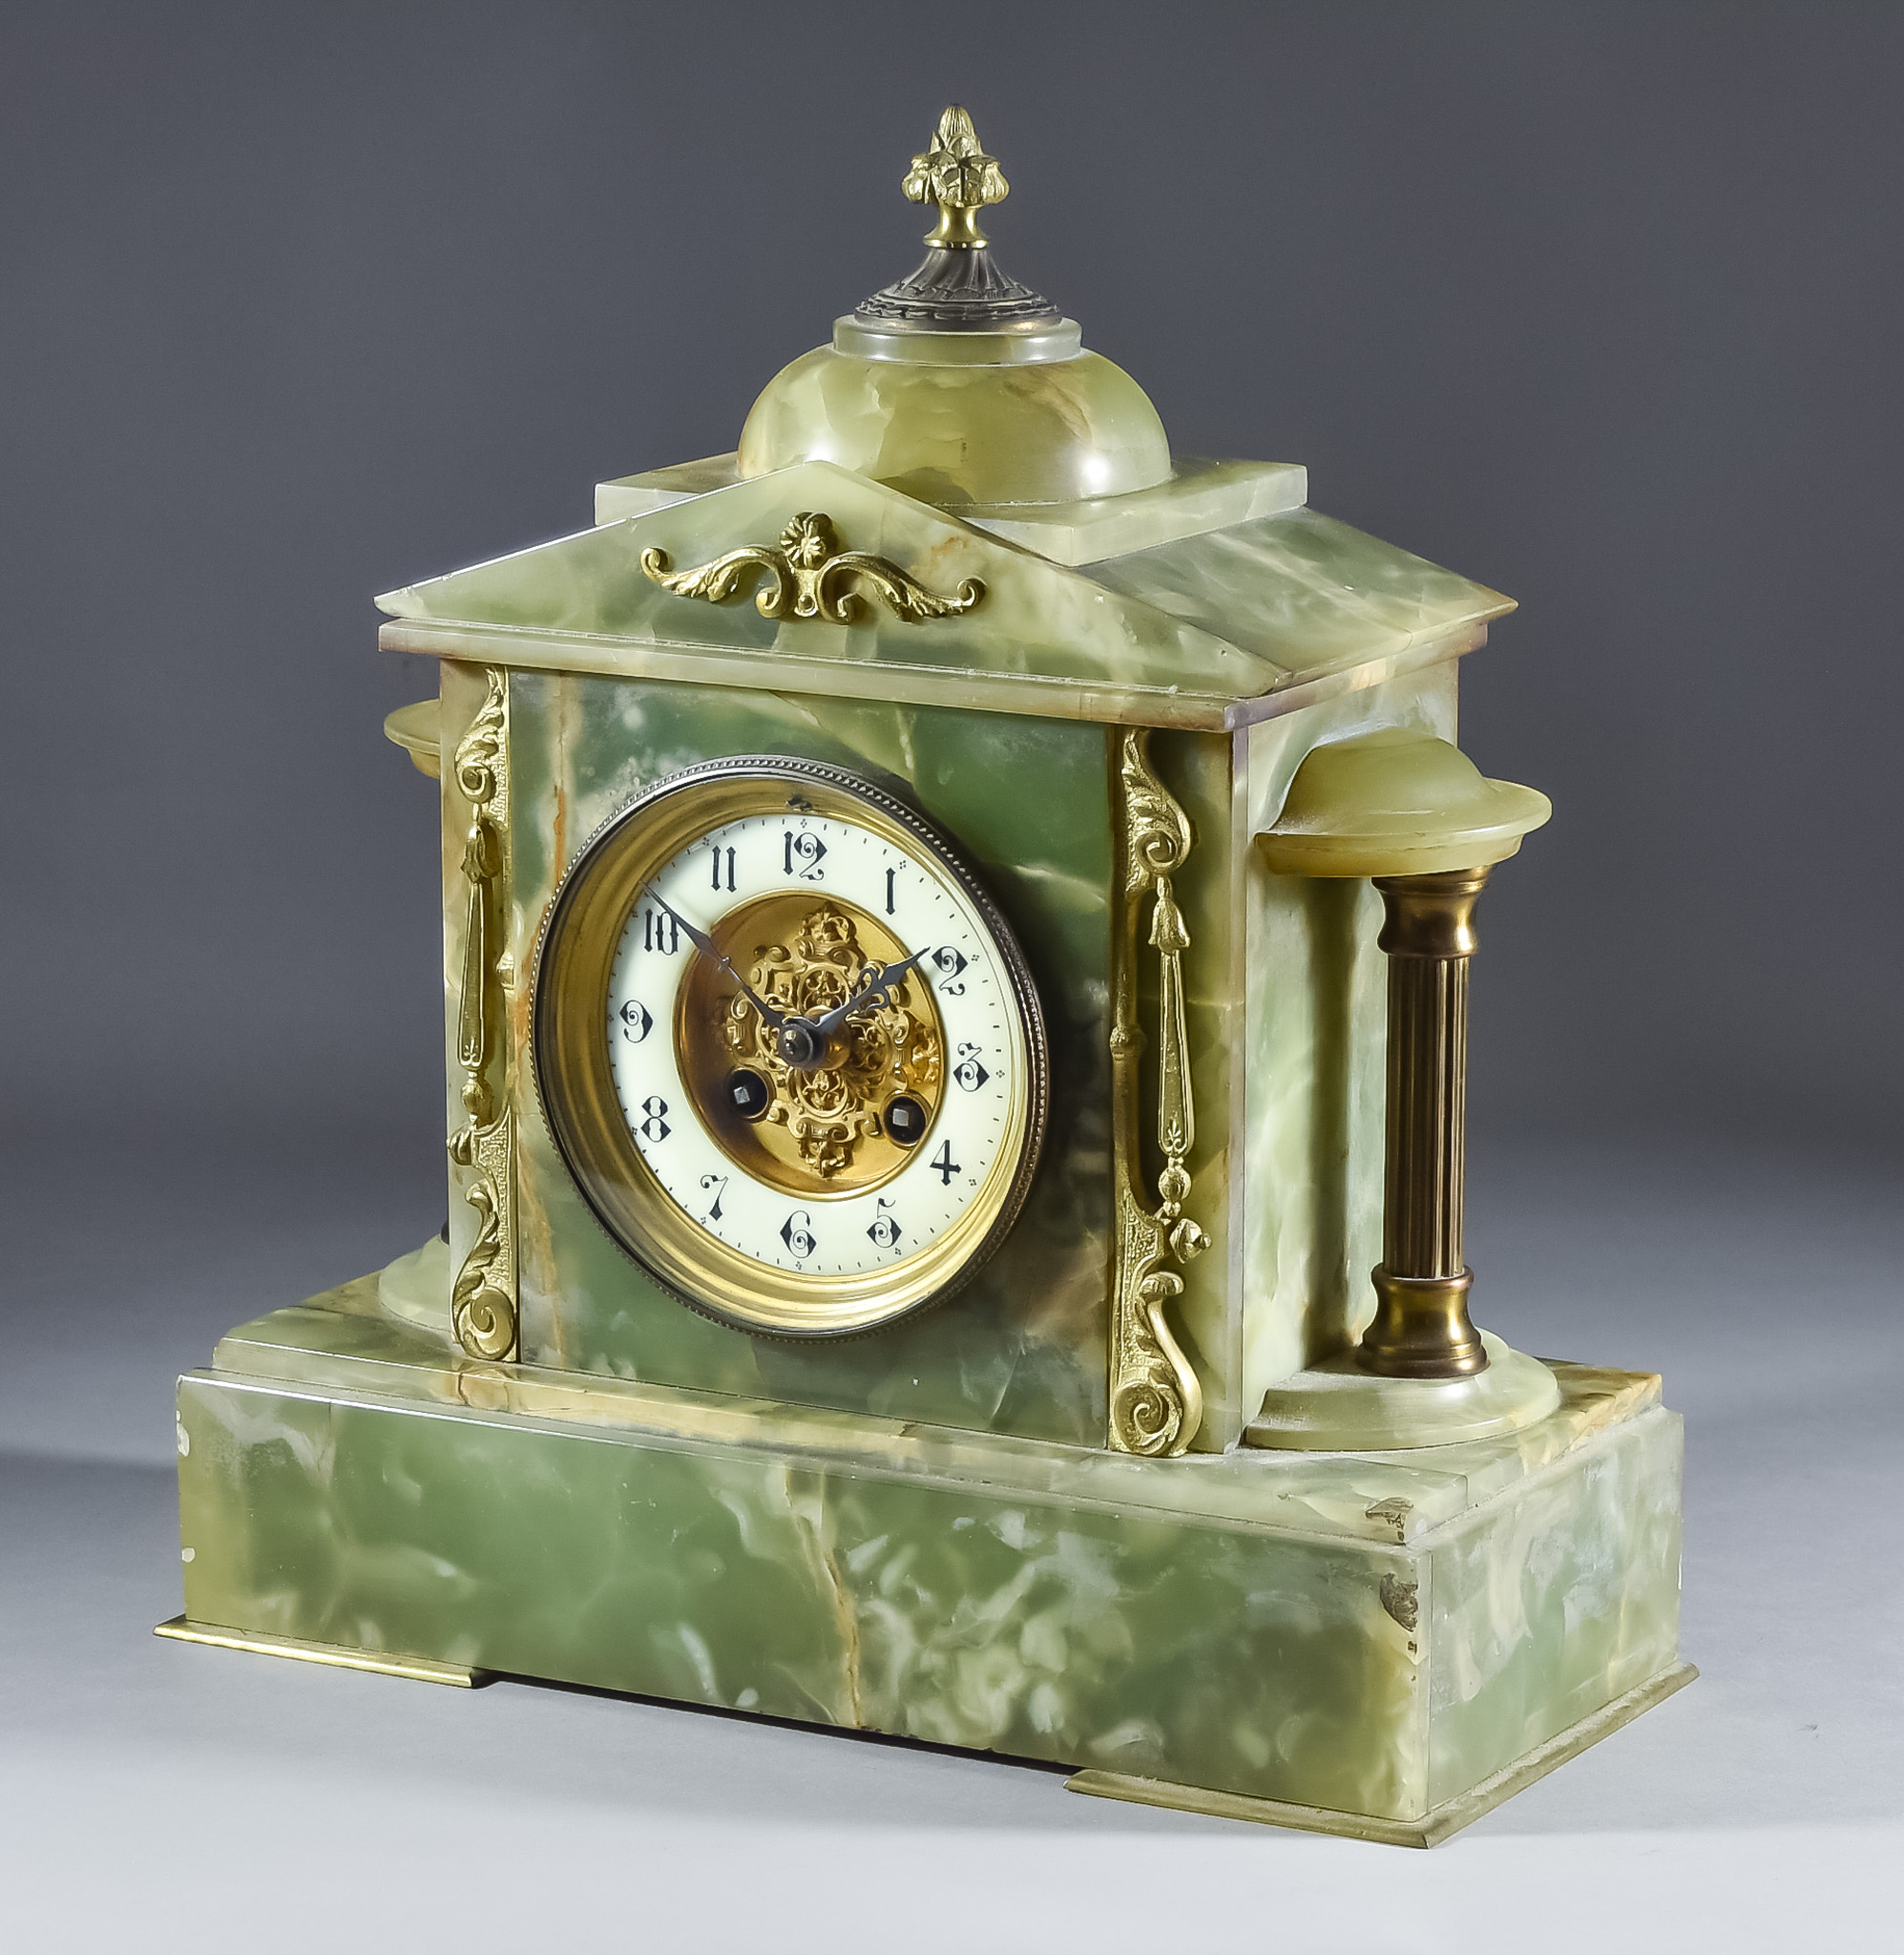 A Late 19th Century French Green Marble and Gilt Metal Mounted Cased Mantel Clock No.15017 the 3.